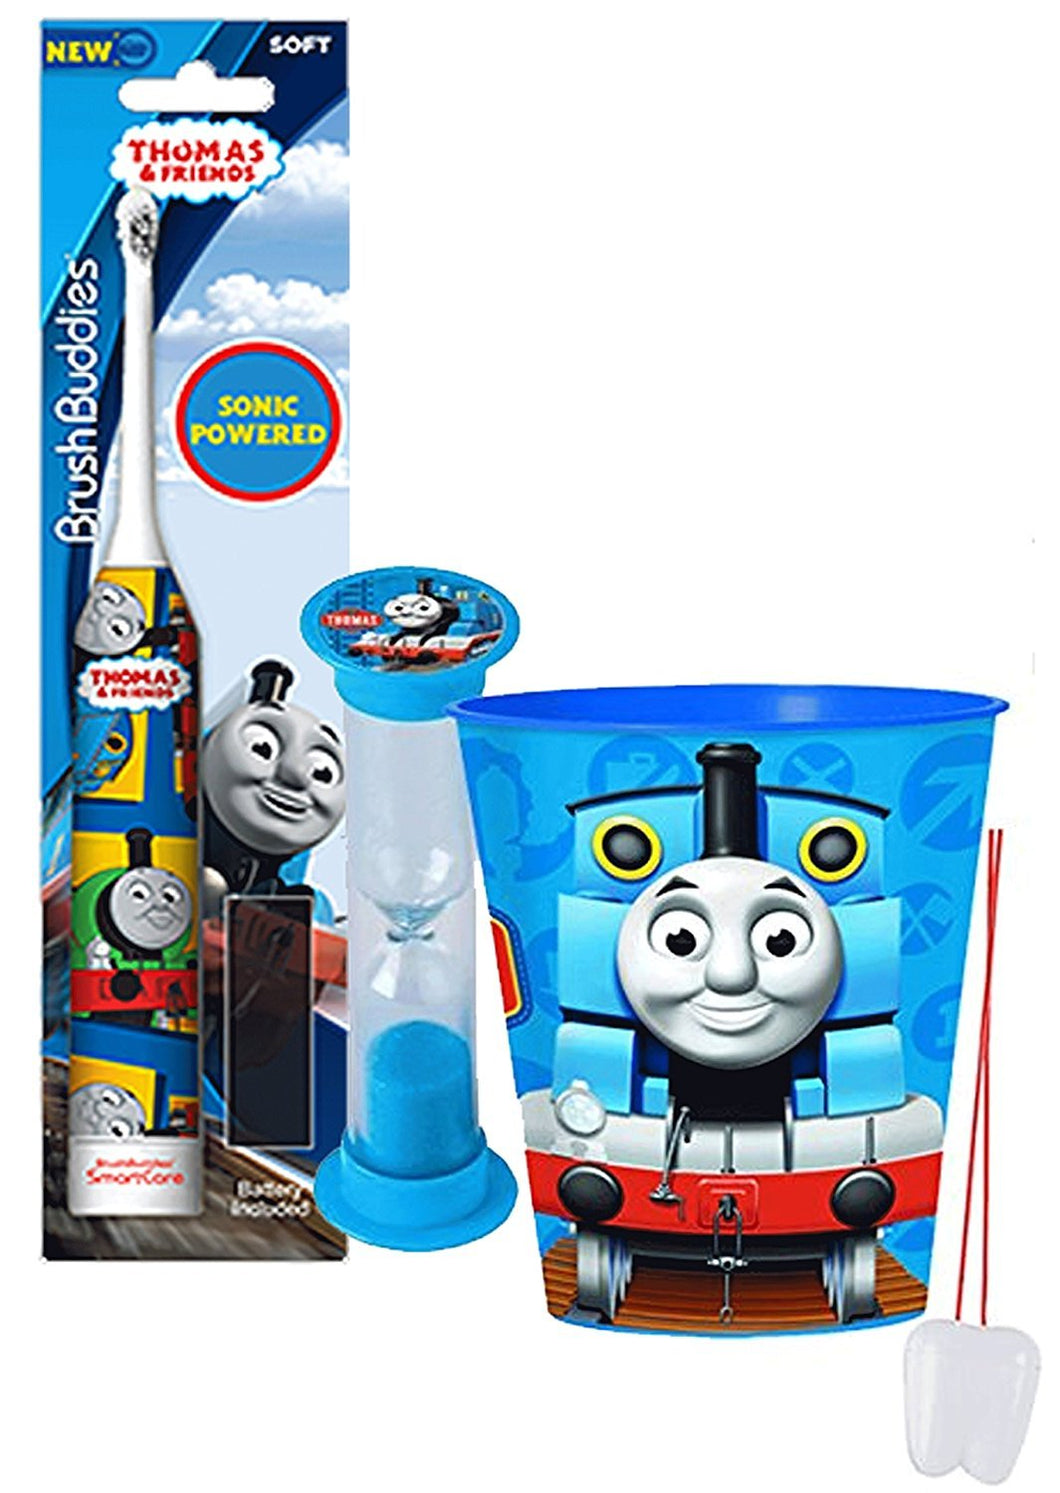 "Thomas the Train" Inspired 3pc Bright Smile Oral Hygiene Set! Thomas and Friends Turbo Powered Spin Toothbrush, Brushing Timer and Mouthwash Rinse Cup! Plus Bonus "Remember To Brush" Visual Aid!